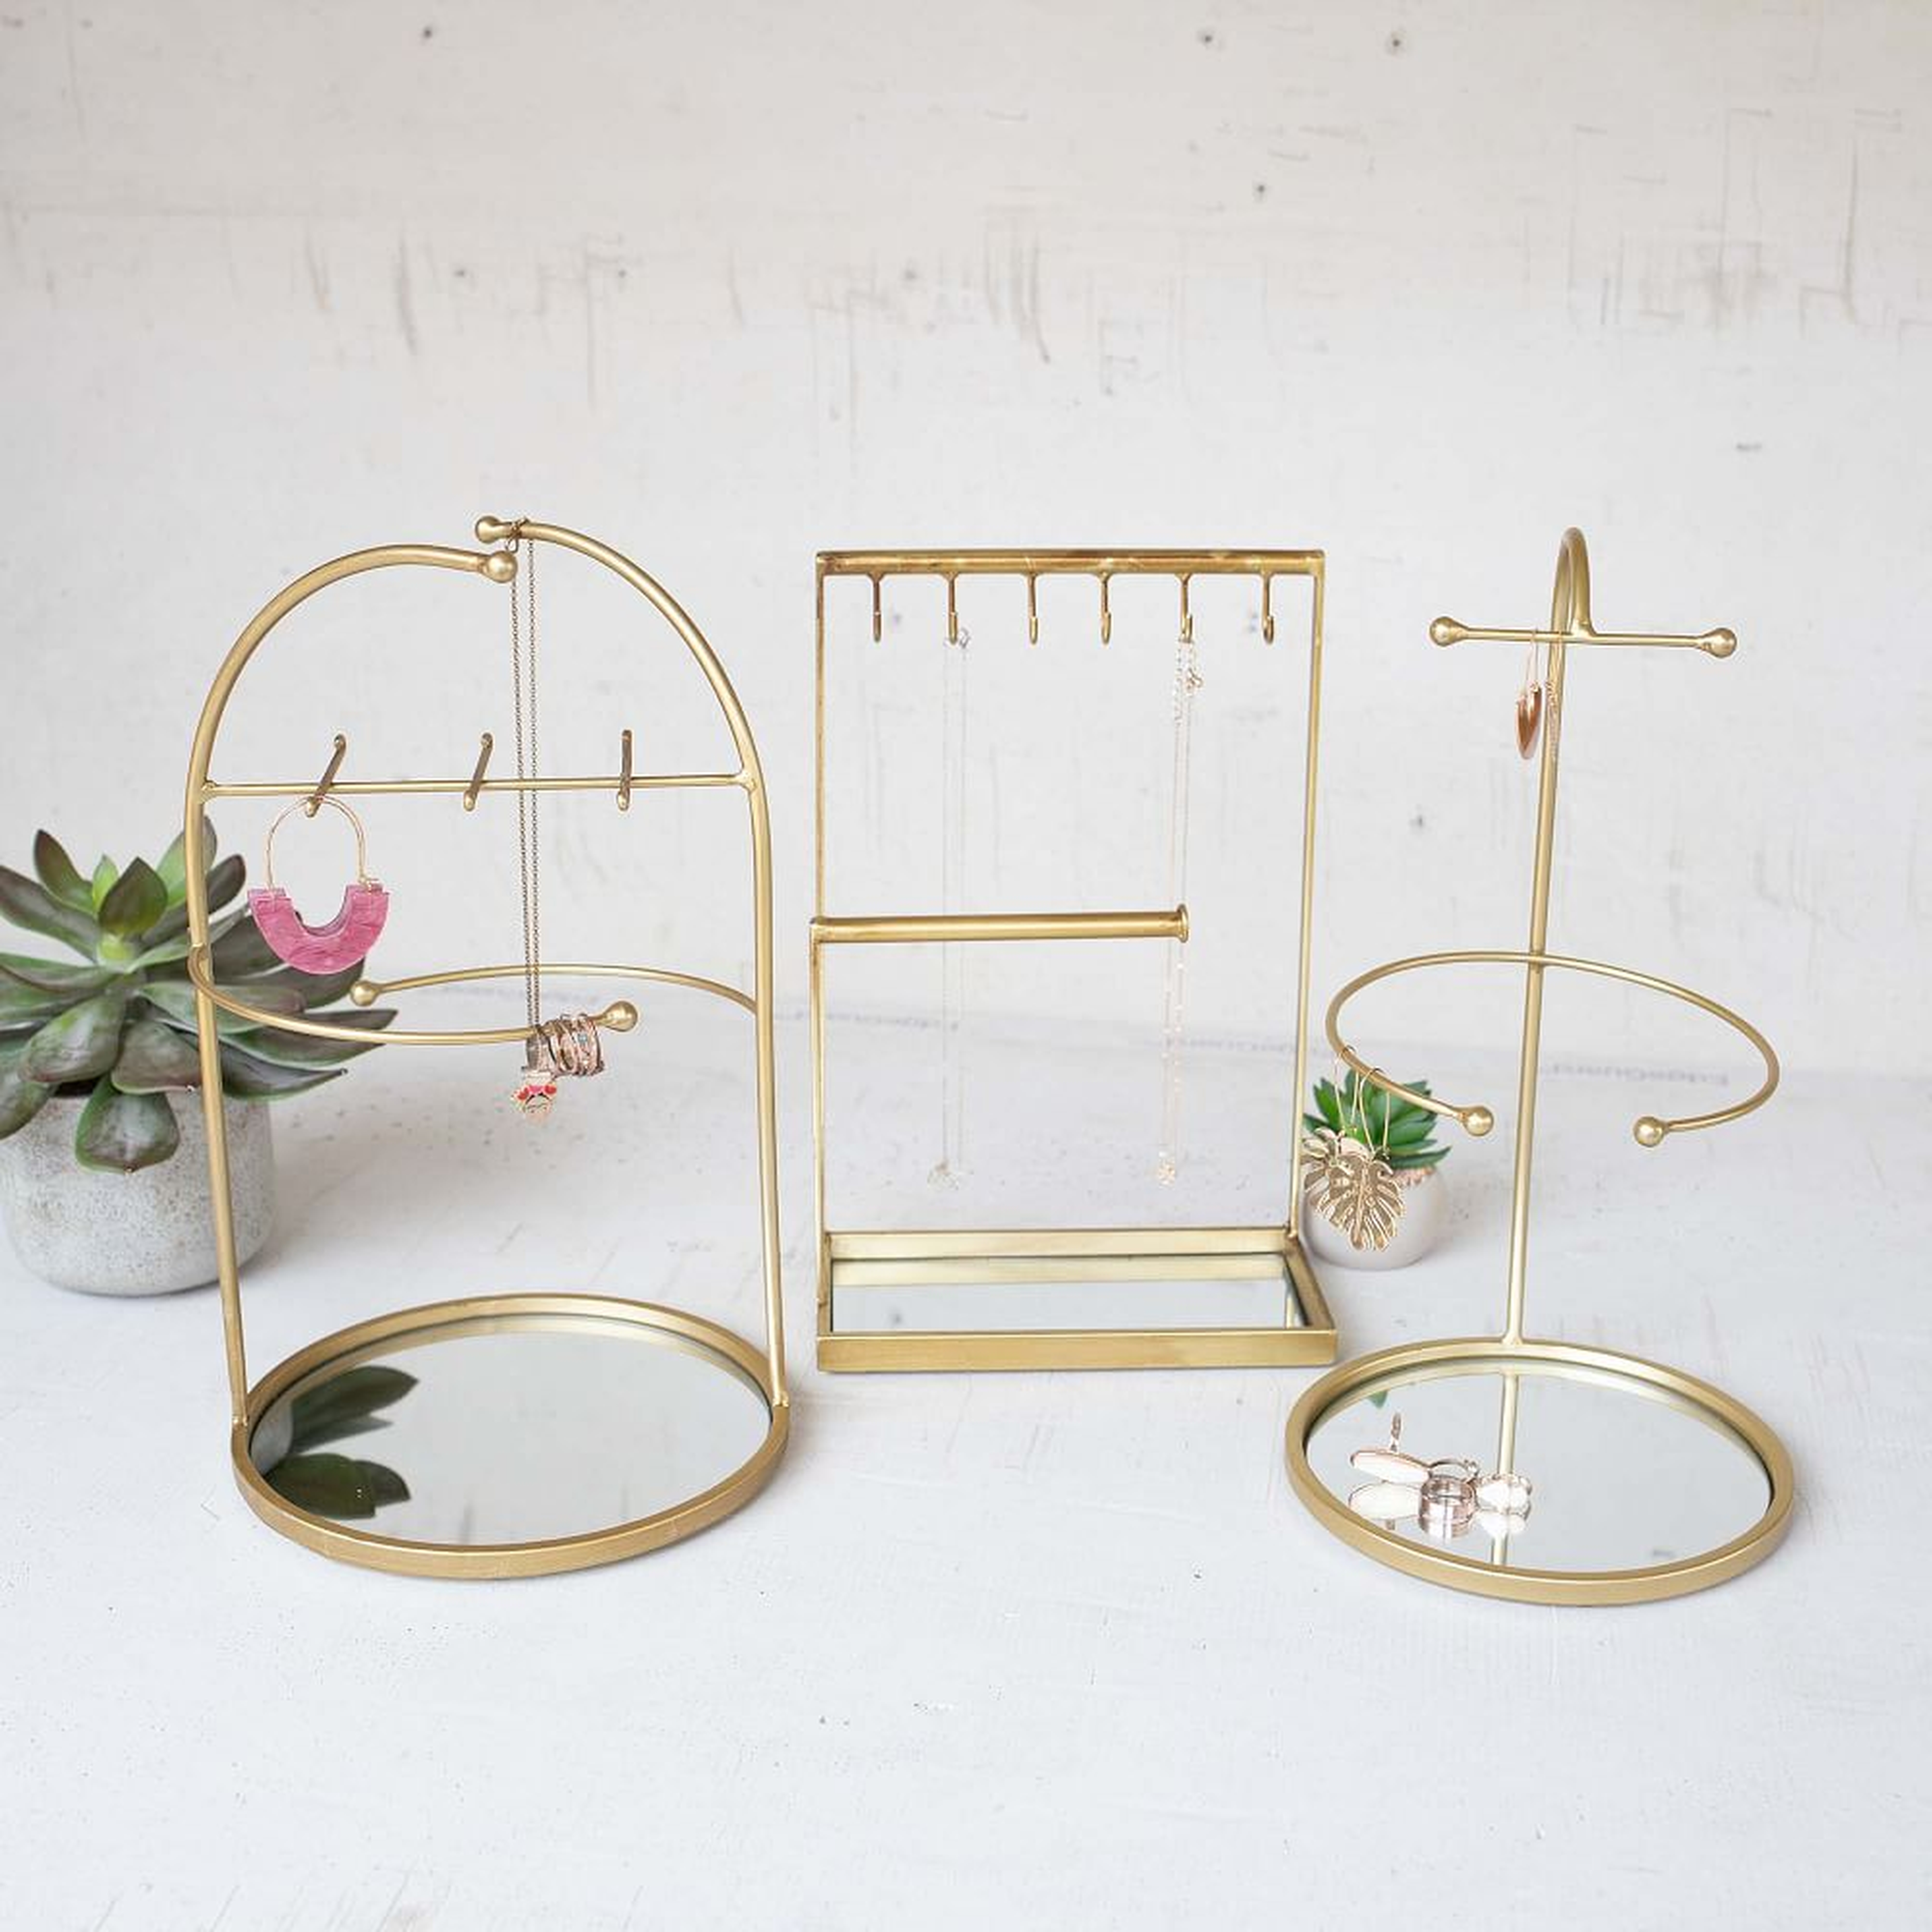 Tabletop Jewelry Stand With Mirror Bases, Set Of 3 - West Elm